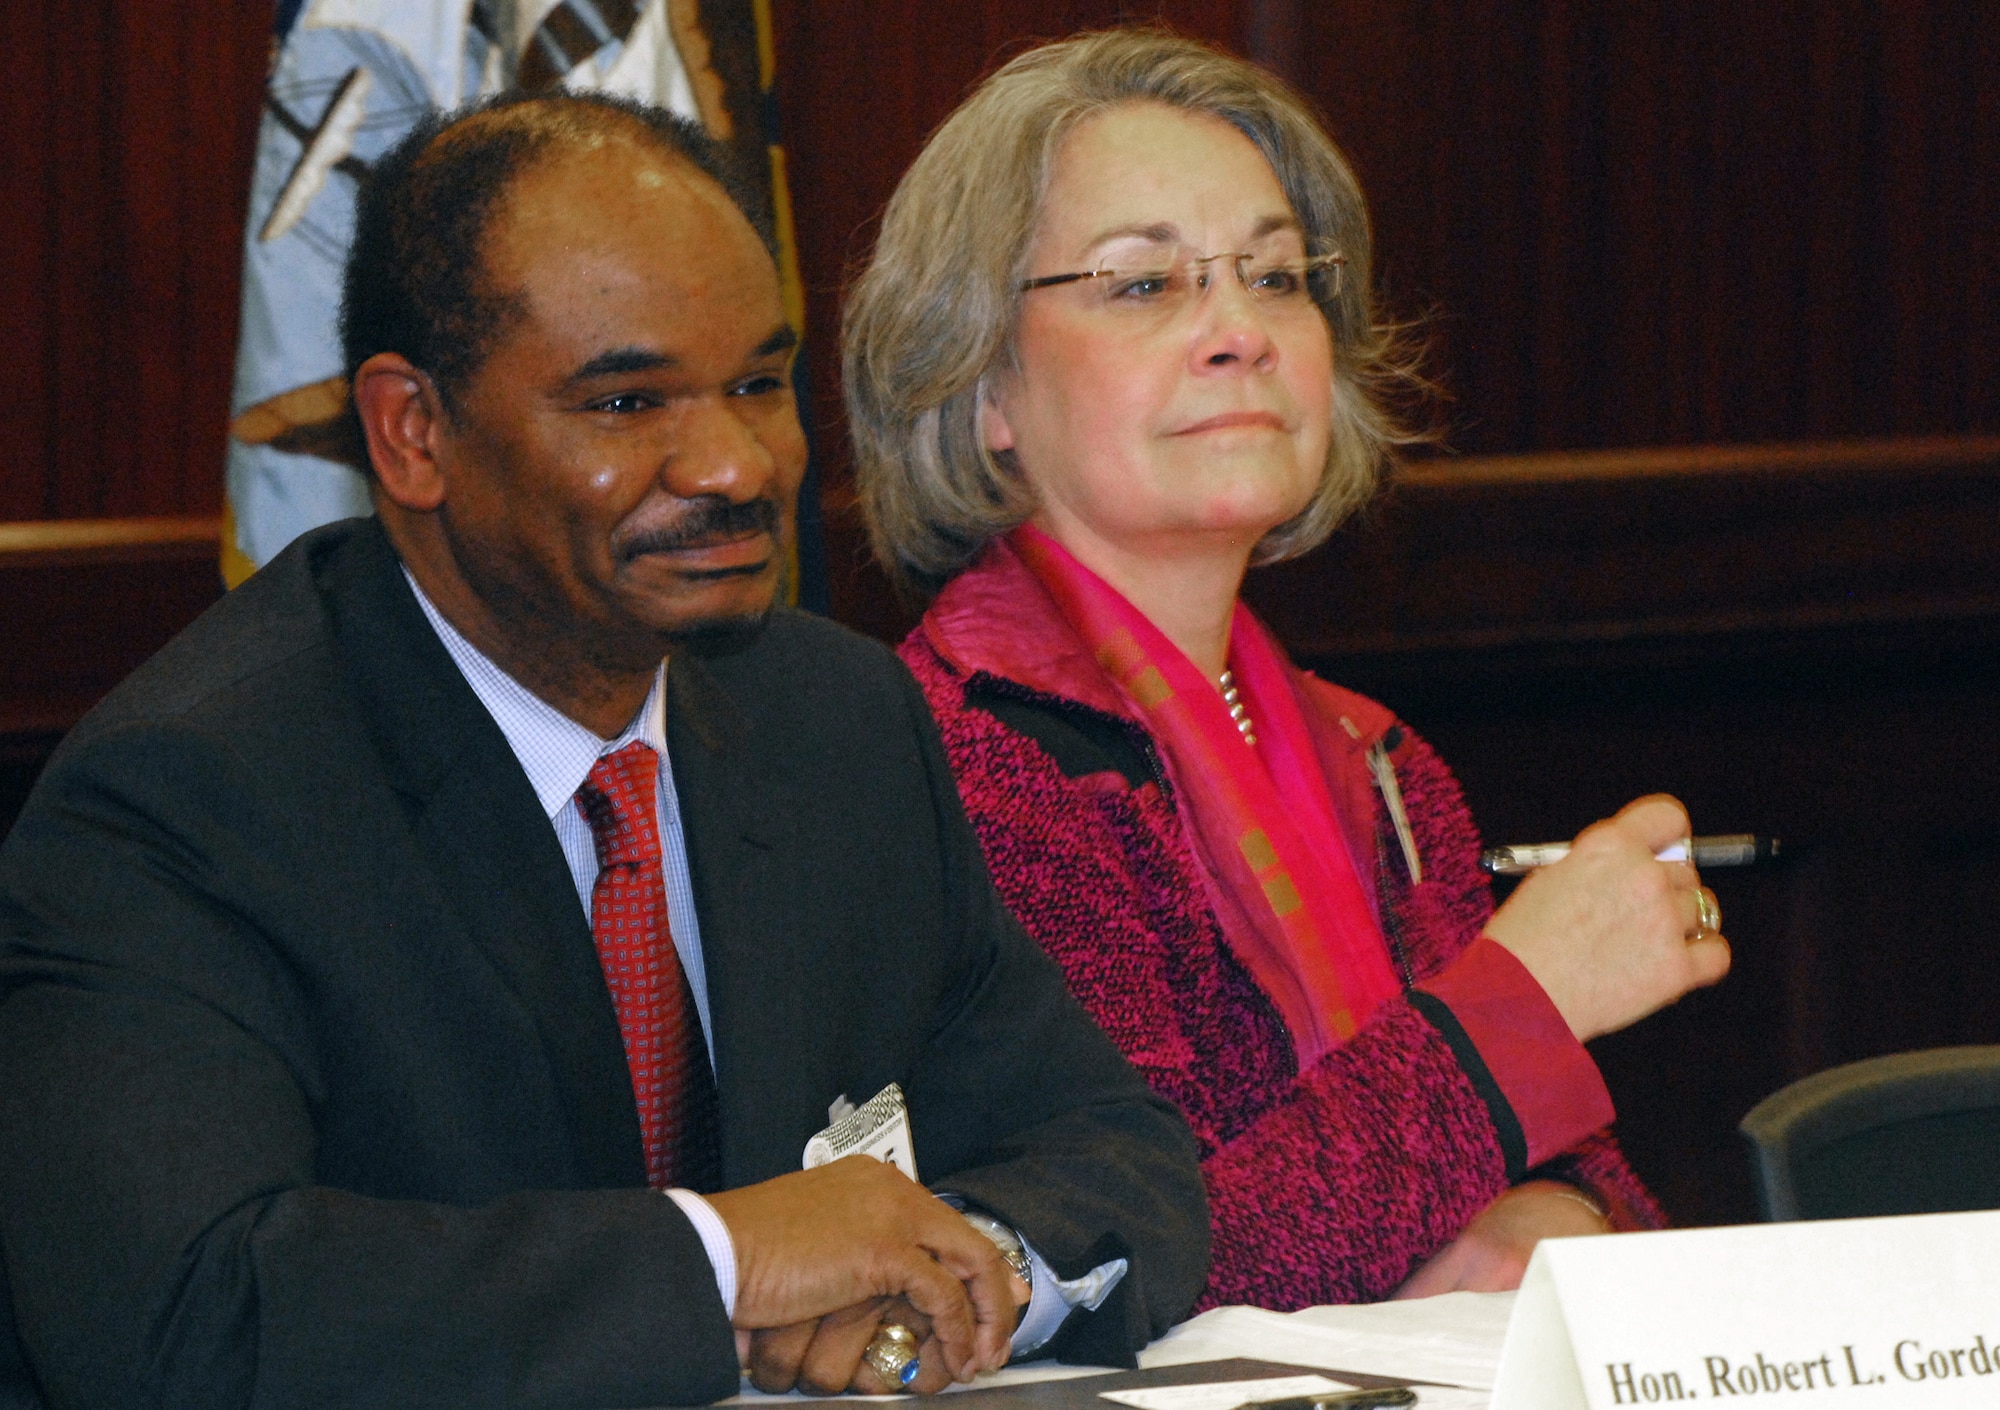 Robert L. Gordon III and Karen Guice take questions Feb. 17, 2011, during the Congressional Military Family Caucus Kickoff in the U.S. Capitol building in Washington. Mr. Gordon is the deputy assistant secretary of defense for military community and family policy. Ms. Guice is the executive director of the Federal Recovery Coordination Program. (Defense Department photo/Elaine Wilson)